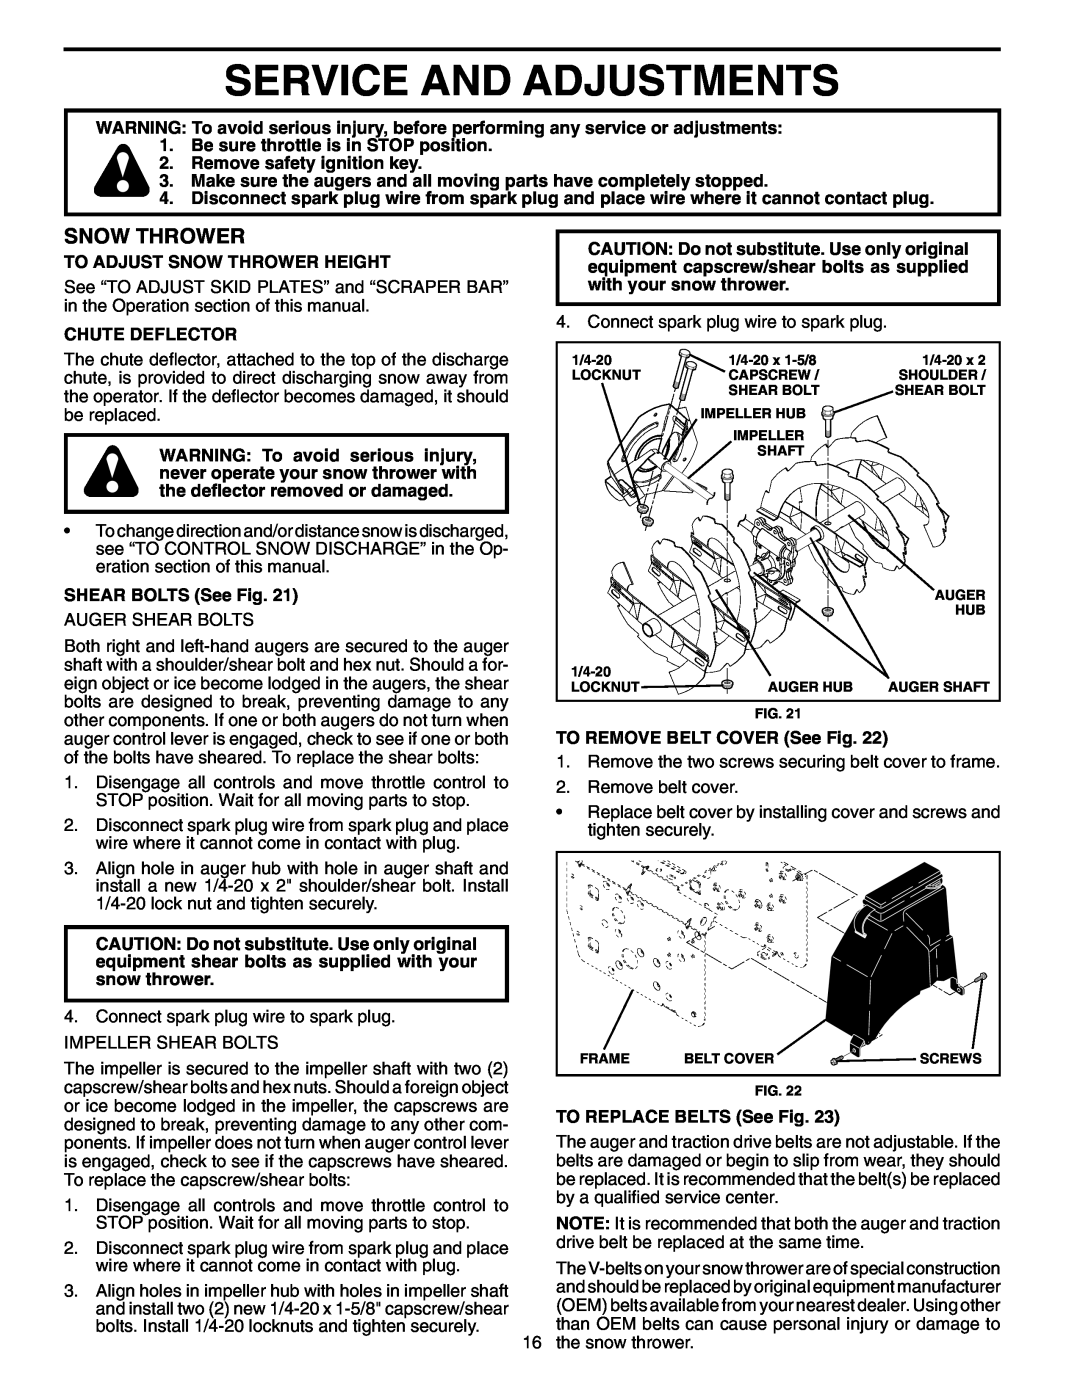 Poulan PO927ES owner manual Service And Adjustments, Snow Thrower 